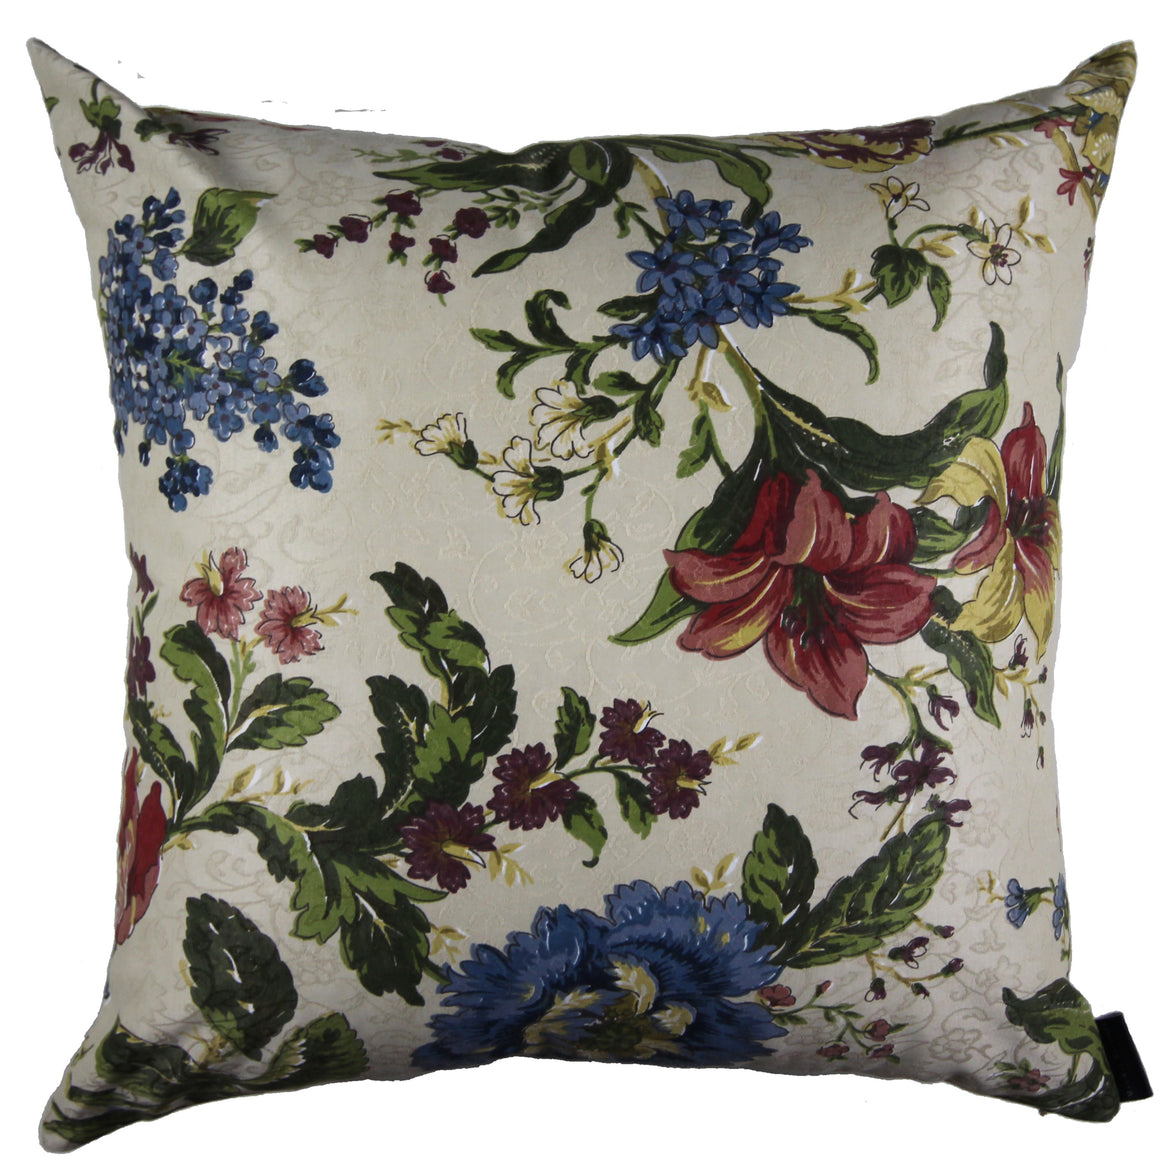 Adriana - Multicolored Floral Pillow Cover - 22x22